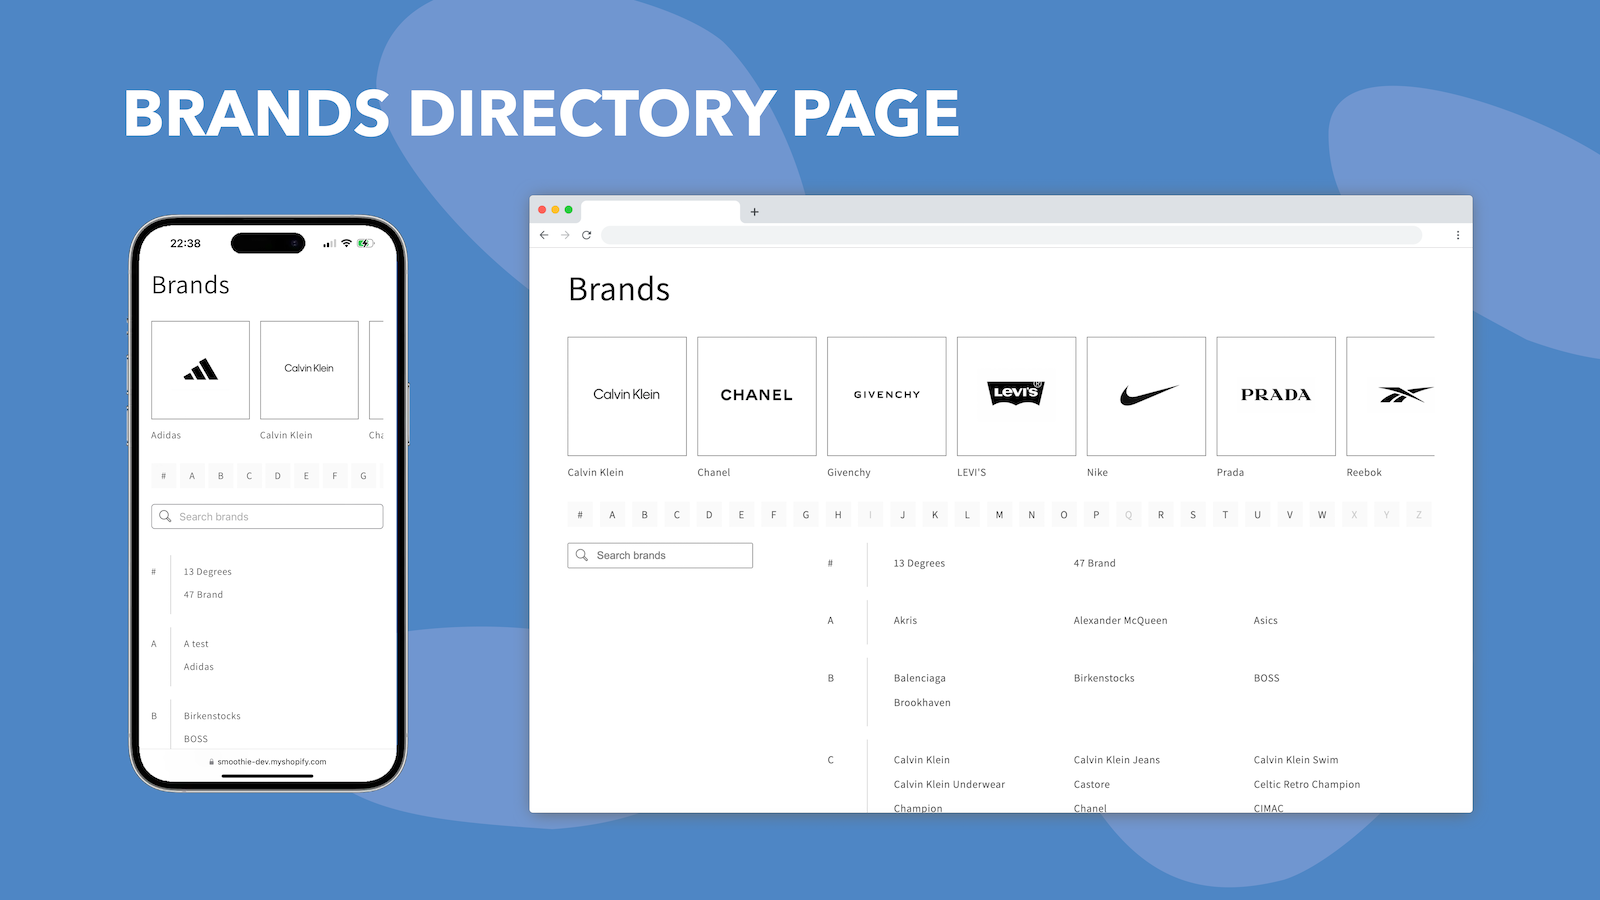 Brands directory page